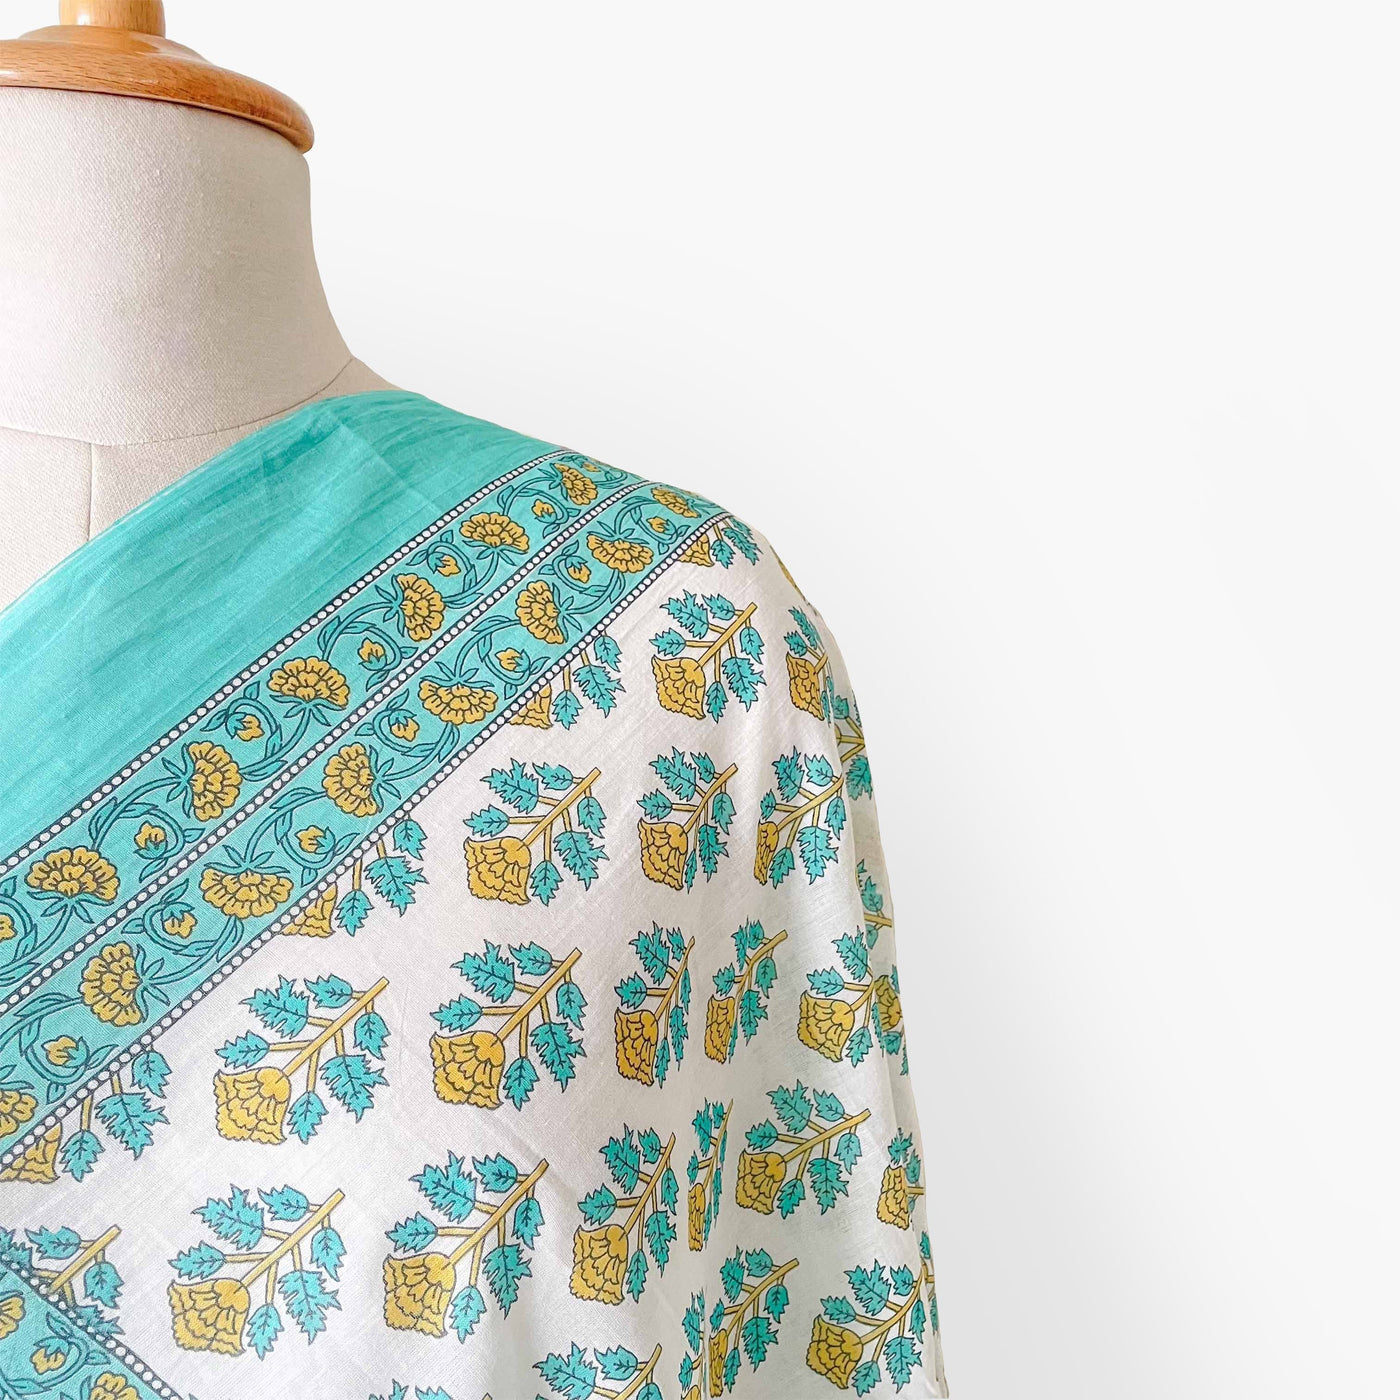 Hand Block Printed Pure Cotton Dupatta Dupatta Bright Turquoise & Yellow Mughal Floral Hand Block Printed Pure Cotton Dupatta (Width 40 Inches)